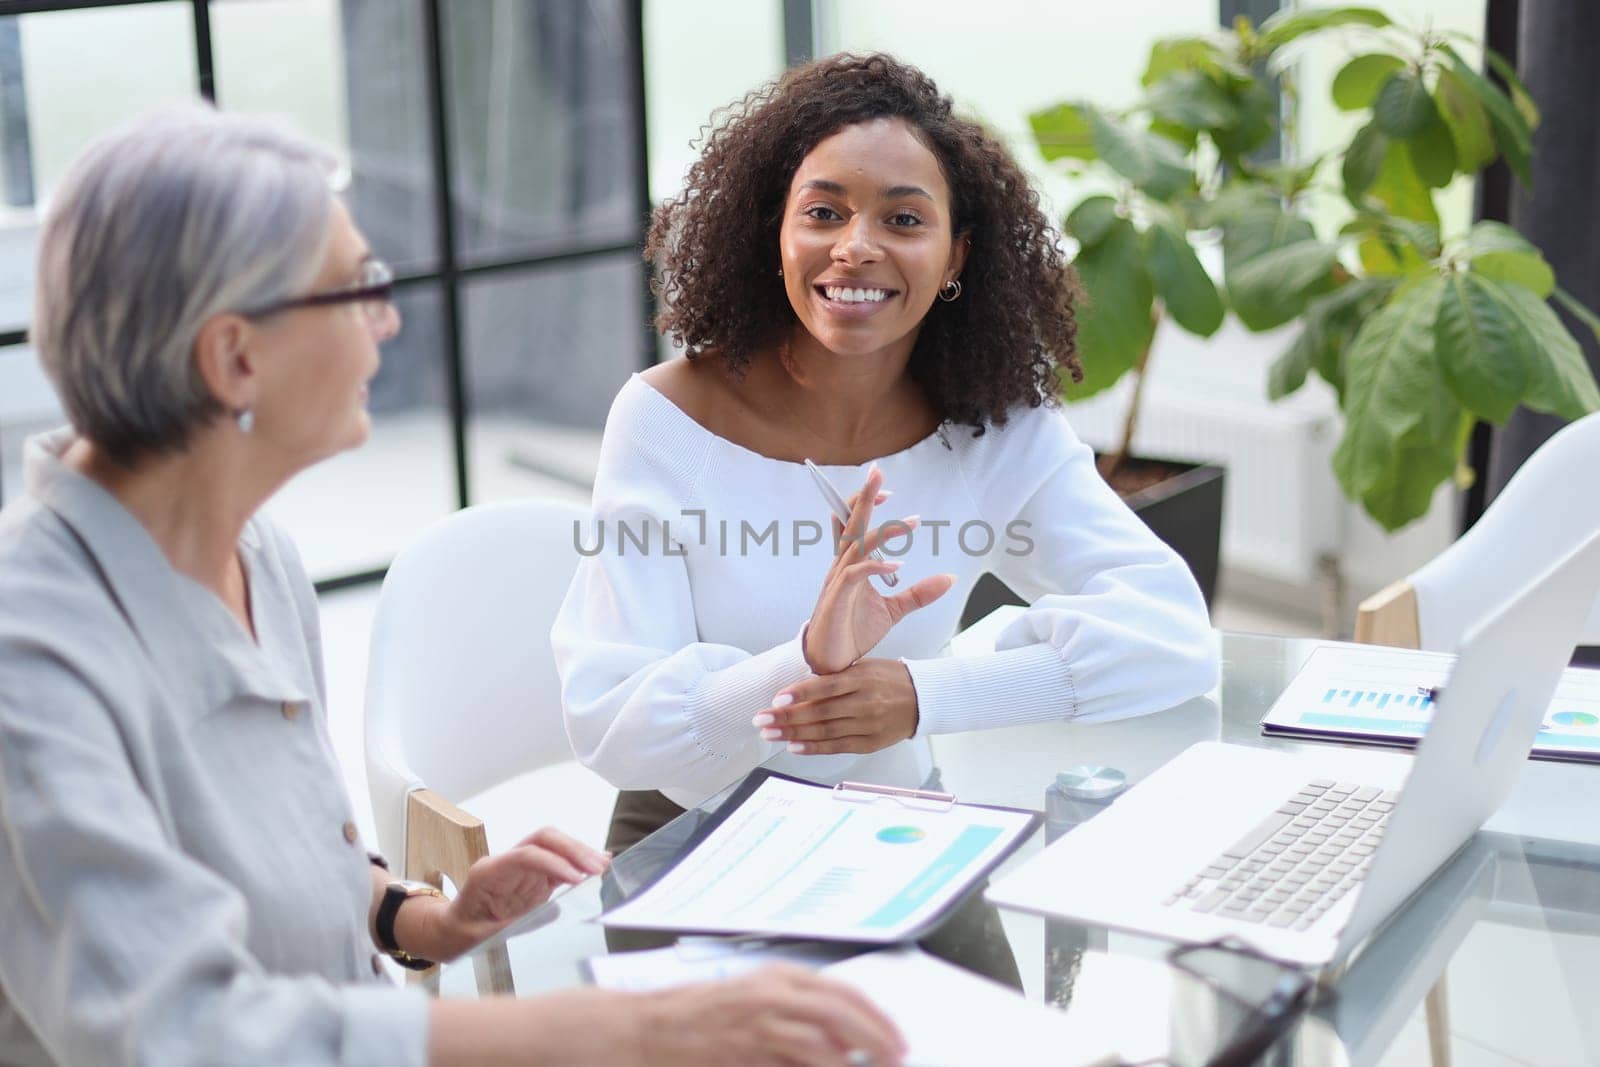 Business women smile while working together on a laptop at a table in the boardroom in the office